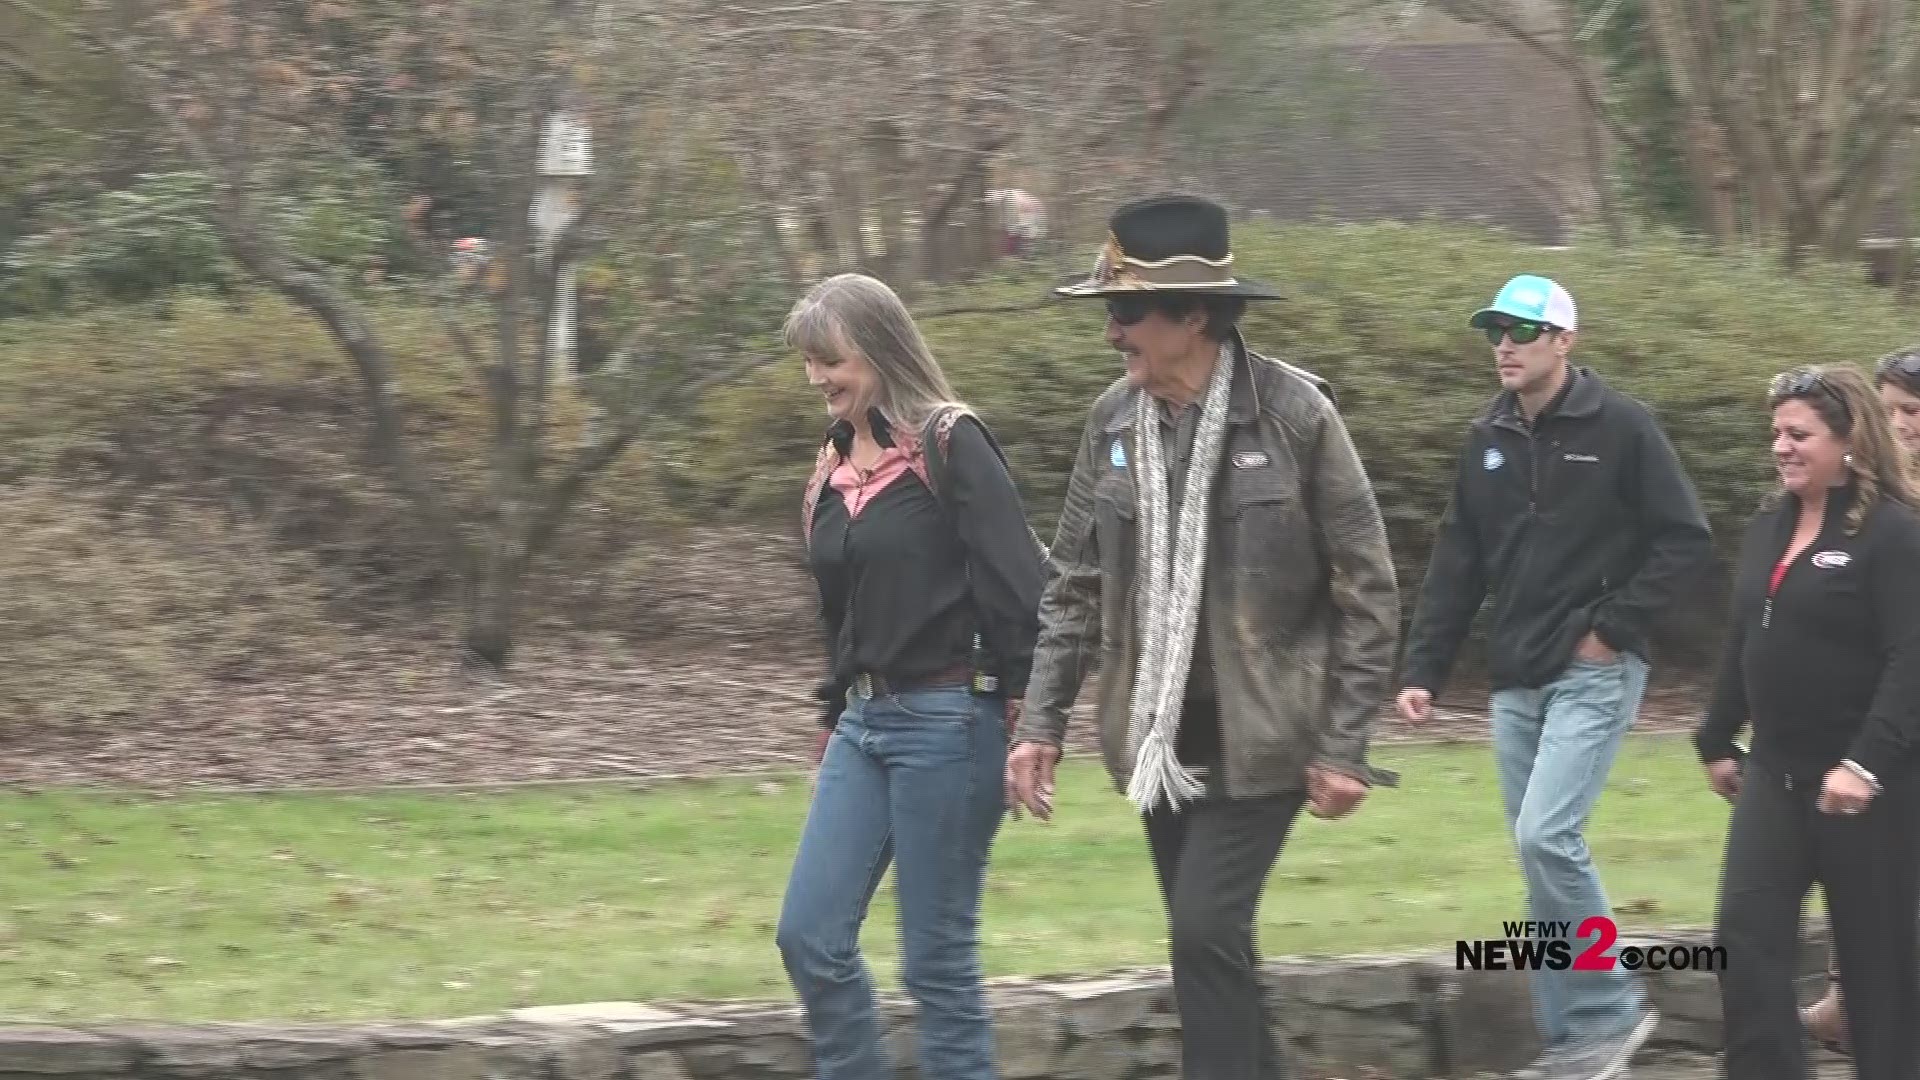 Renae Rottler traveled with her husband Mark from Troy, Missouri to meet the King of Racing himself, Richard Petty, at his home in Randleman. They left with a new car.